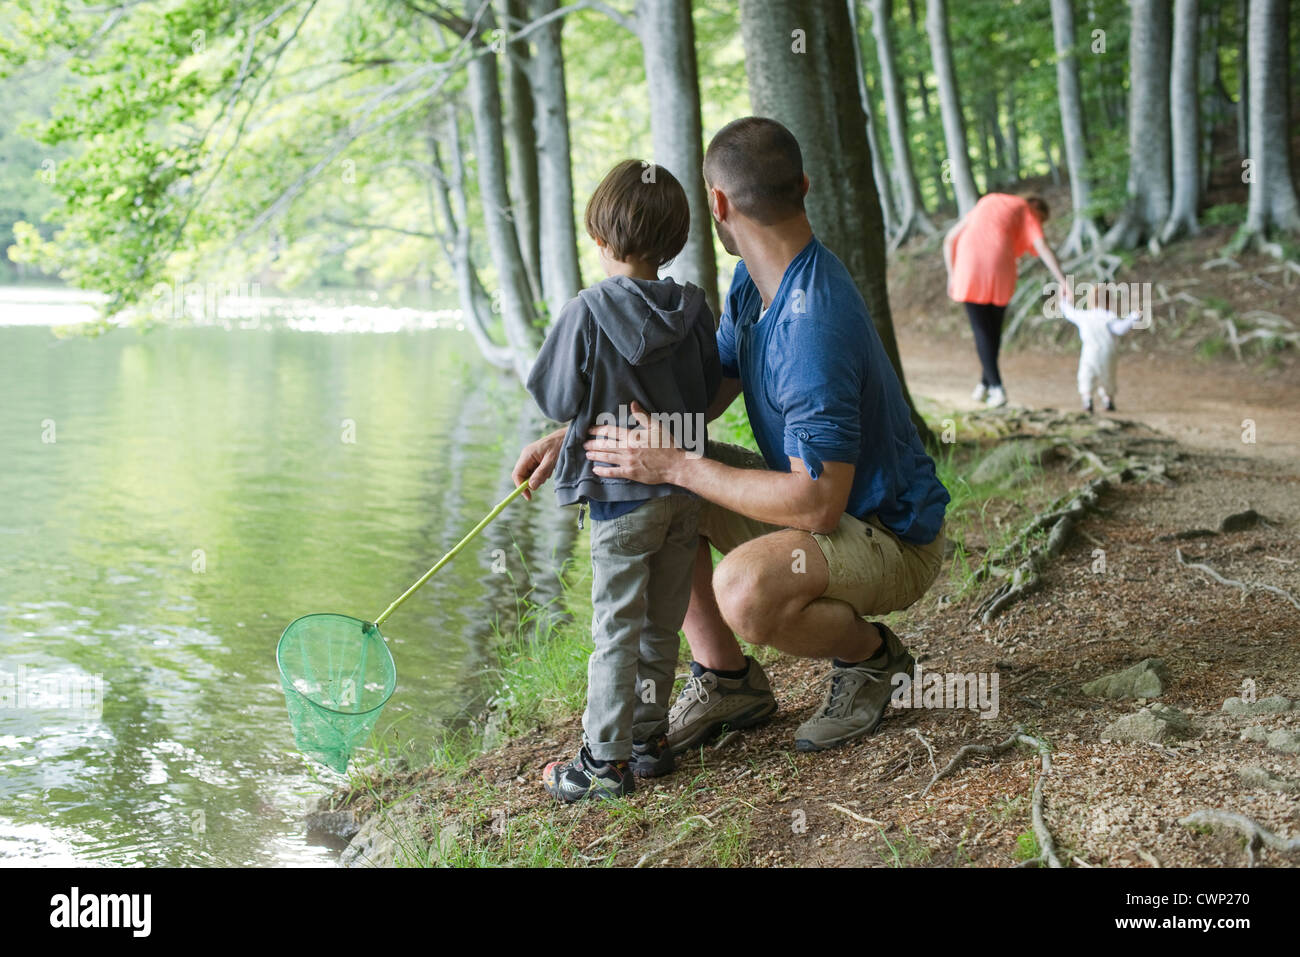 Father and son fishing in woods, both looking away Stock Photo